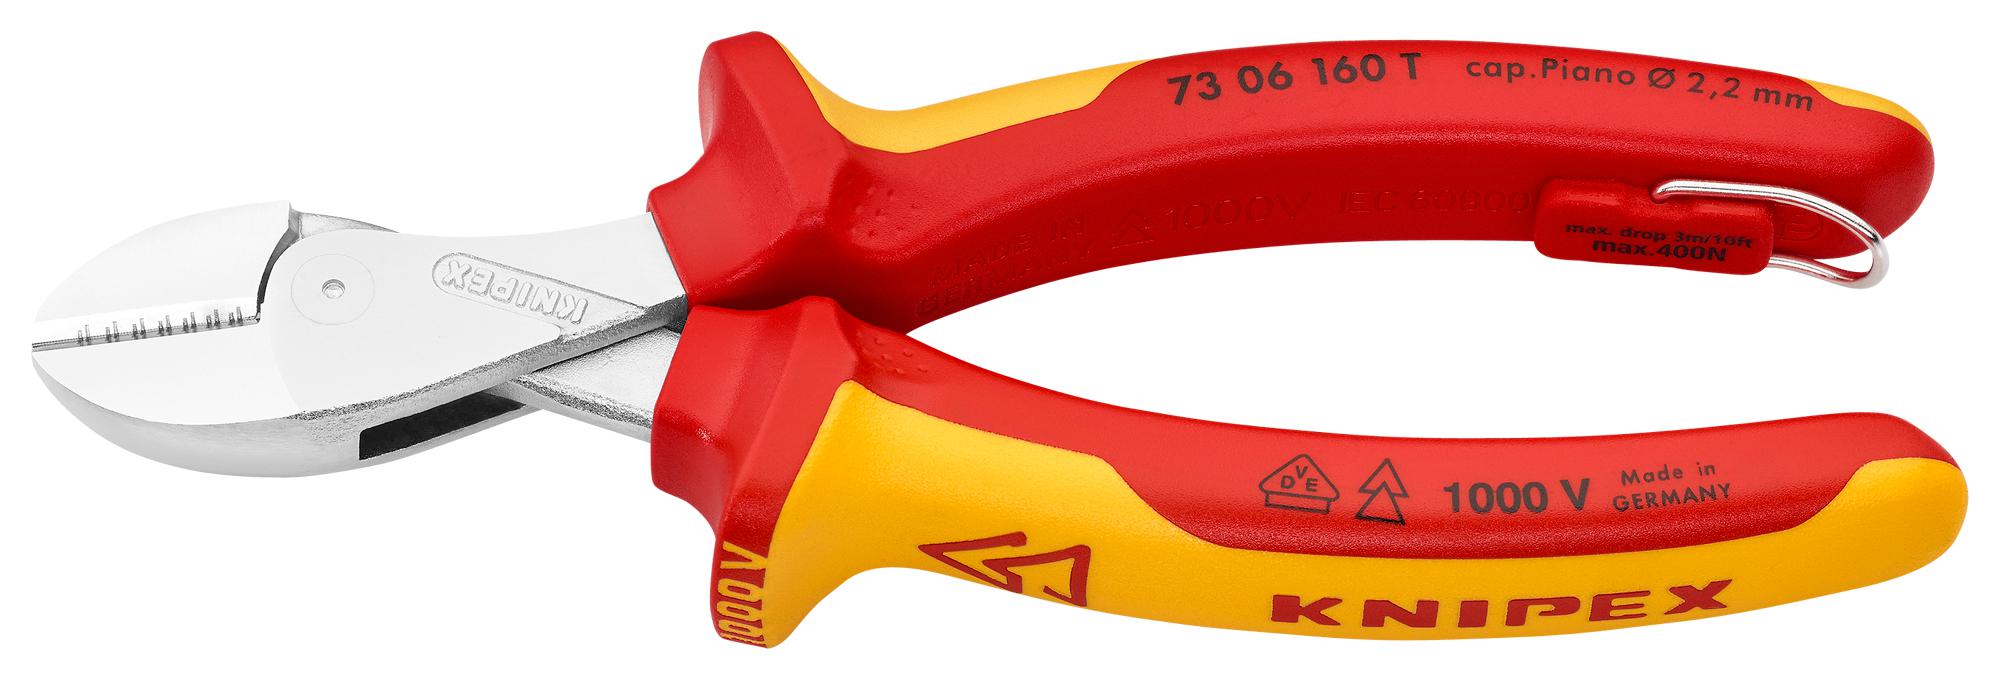 73 06 160 T WIRE CUTTER, DIAGONAL, 12MM, 160MM KNIPEX